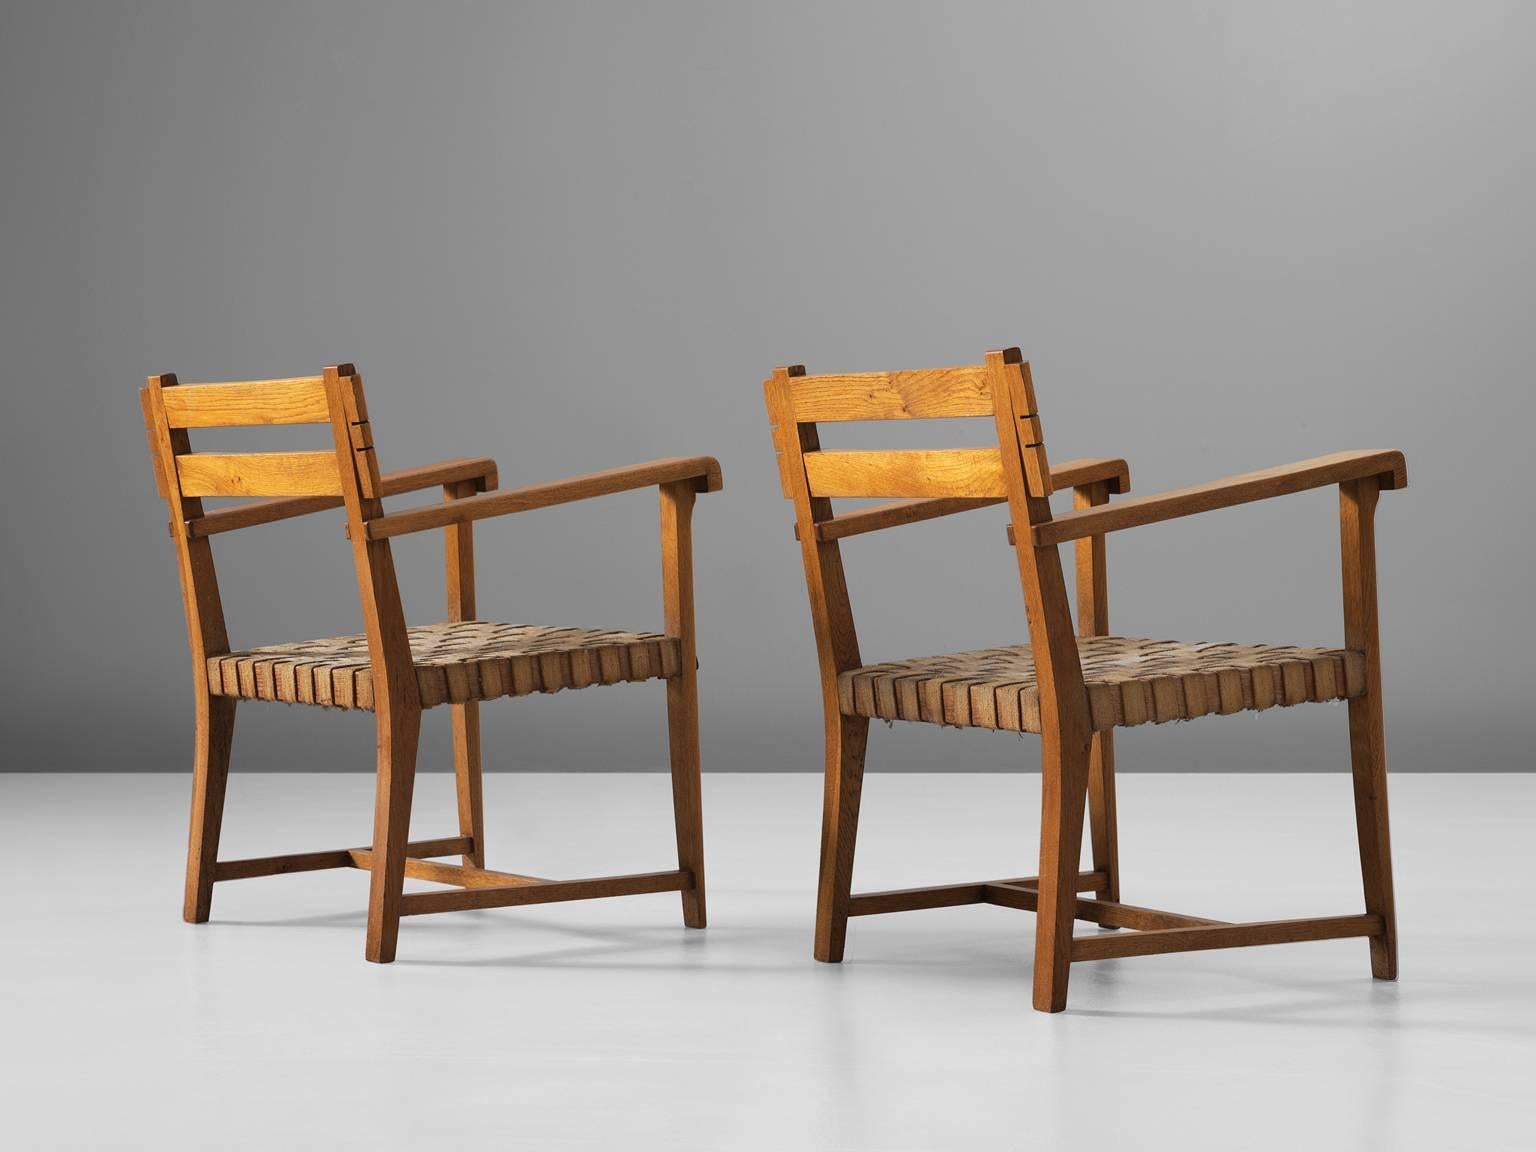 Armchairs, oak and rope, 1940s, France.

These two armchairs in the style of Charles Dudouyt (1885-1946) are both elegant and sturdy in their design. These two chairs might be the perfect pair to stand in a grand entrance or hall way. The roped